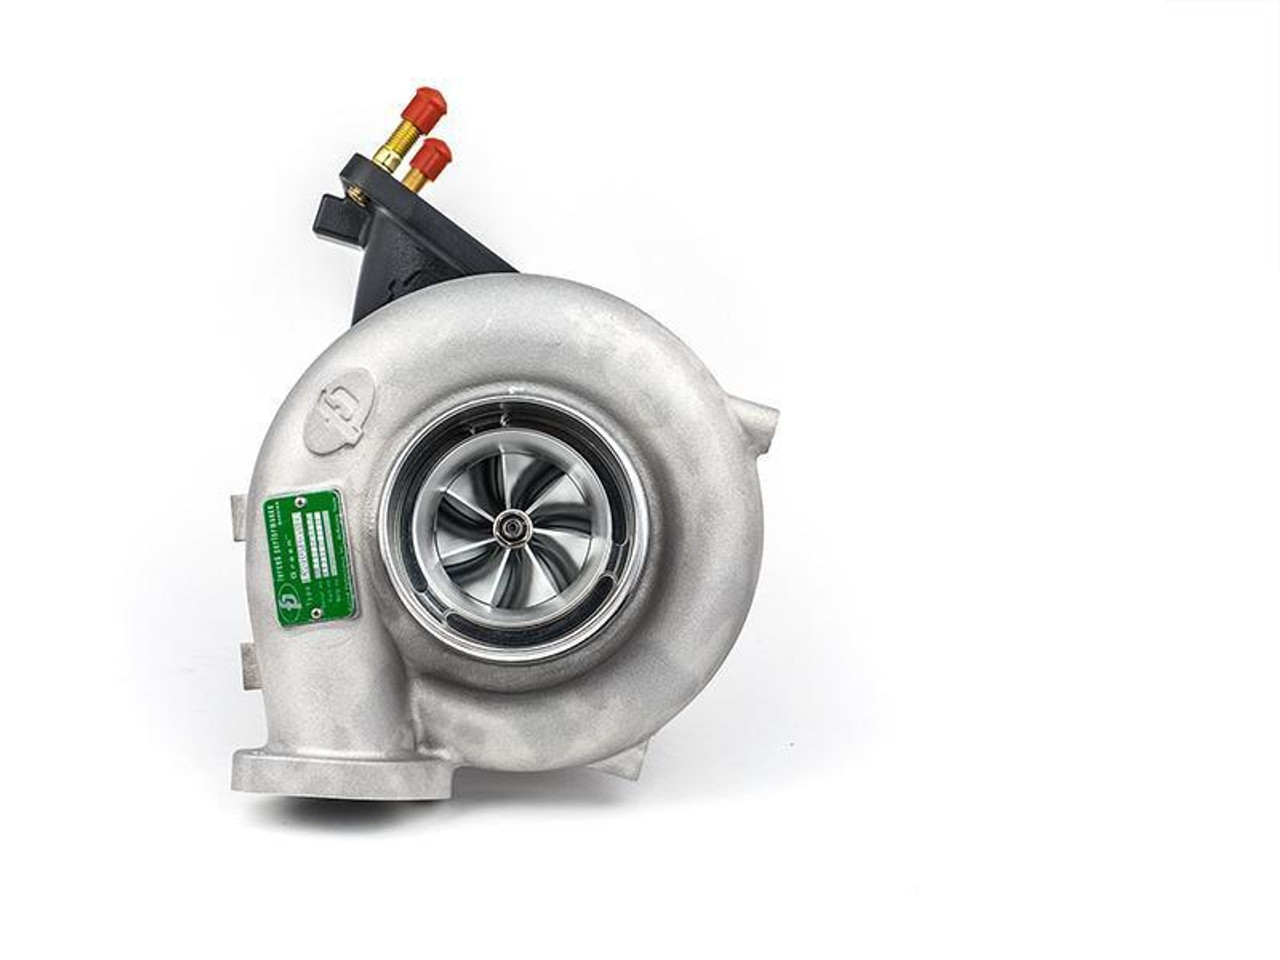 Forced Performance GREEN Turbocharger for Evolution IX